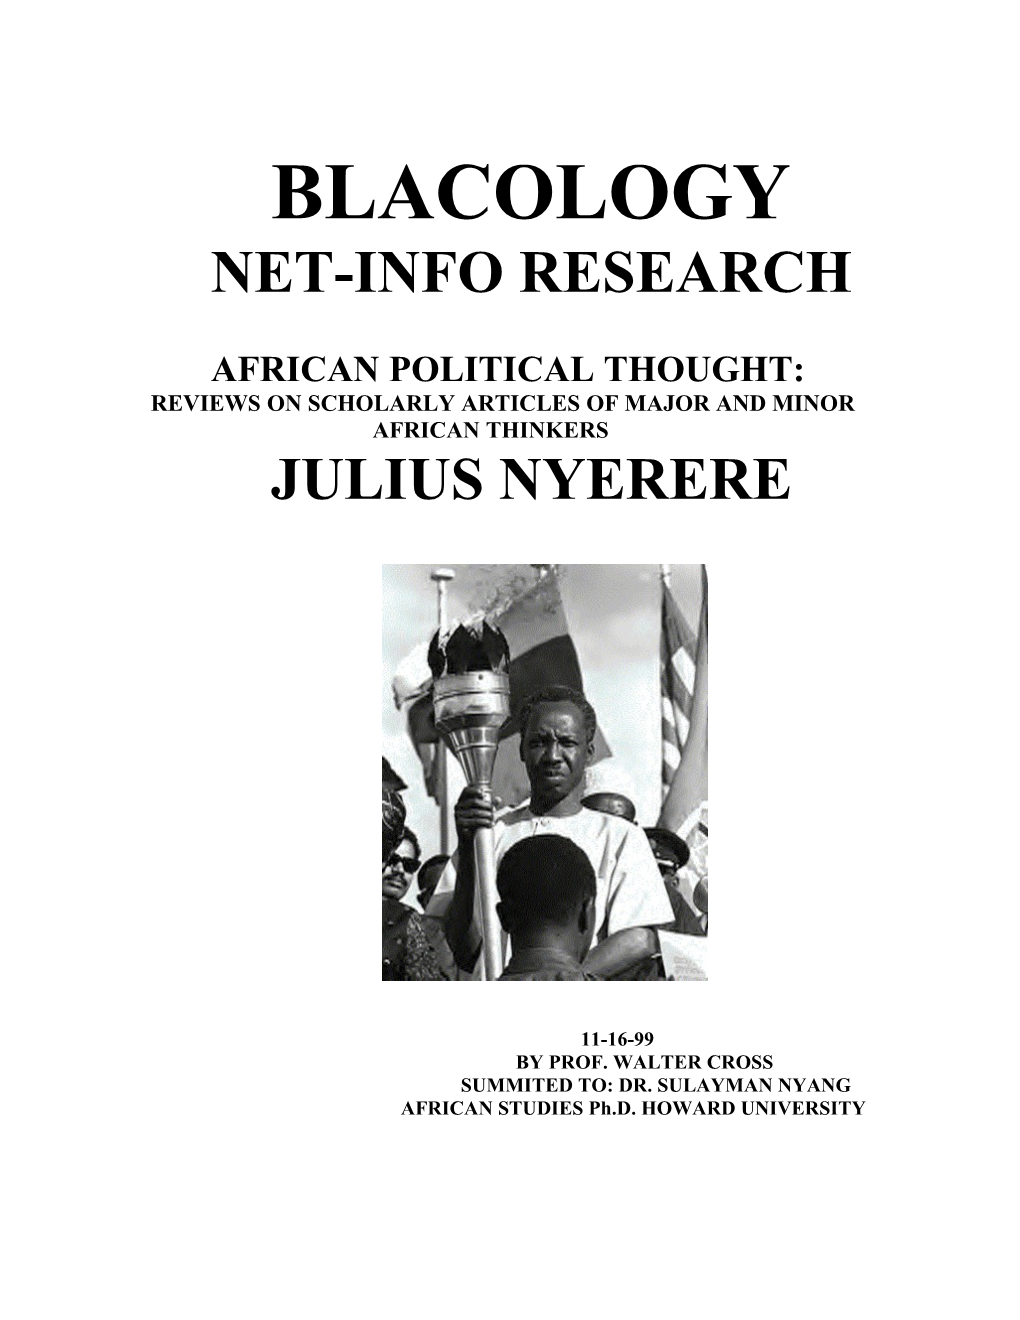 A Blacological Analysis of African Thinkers